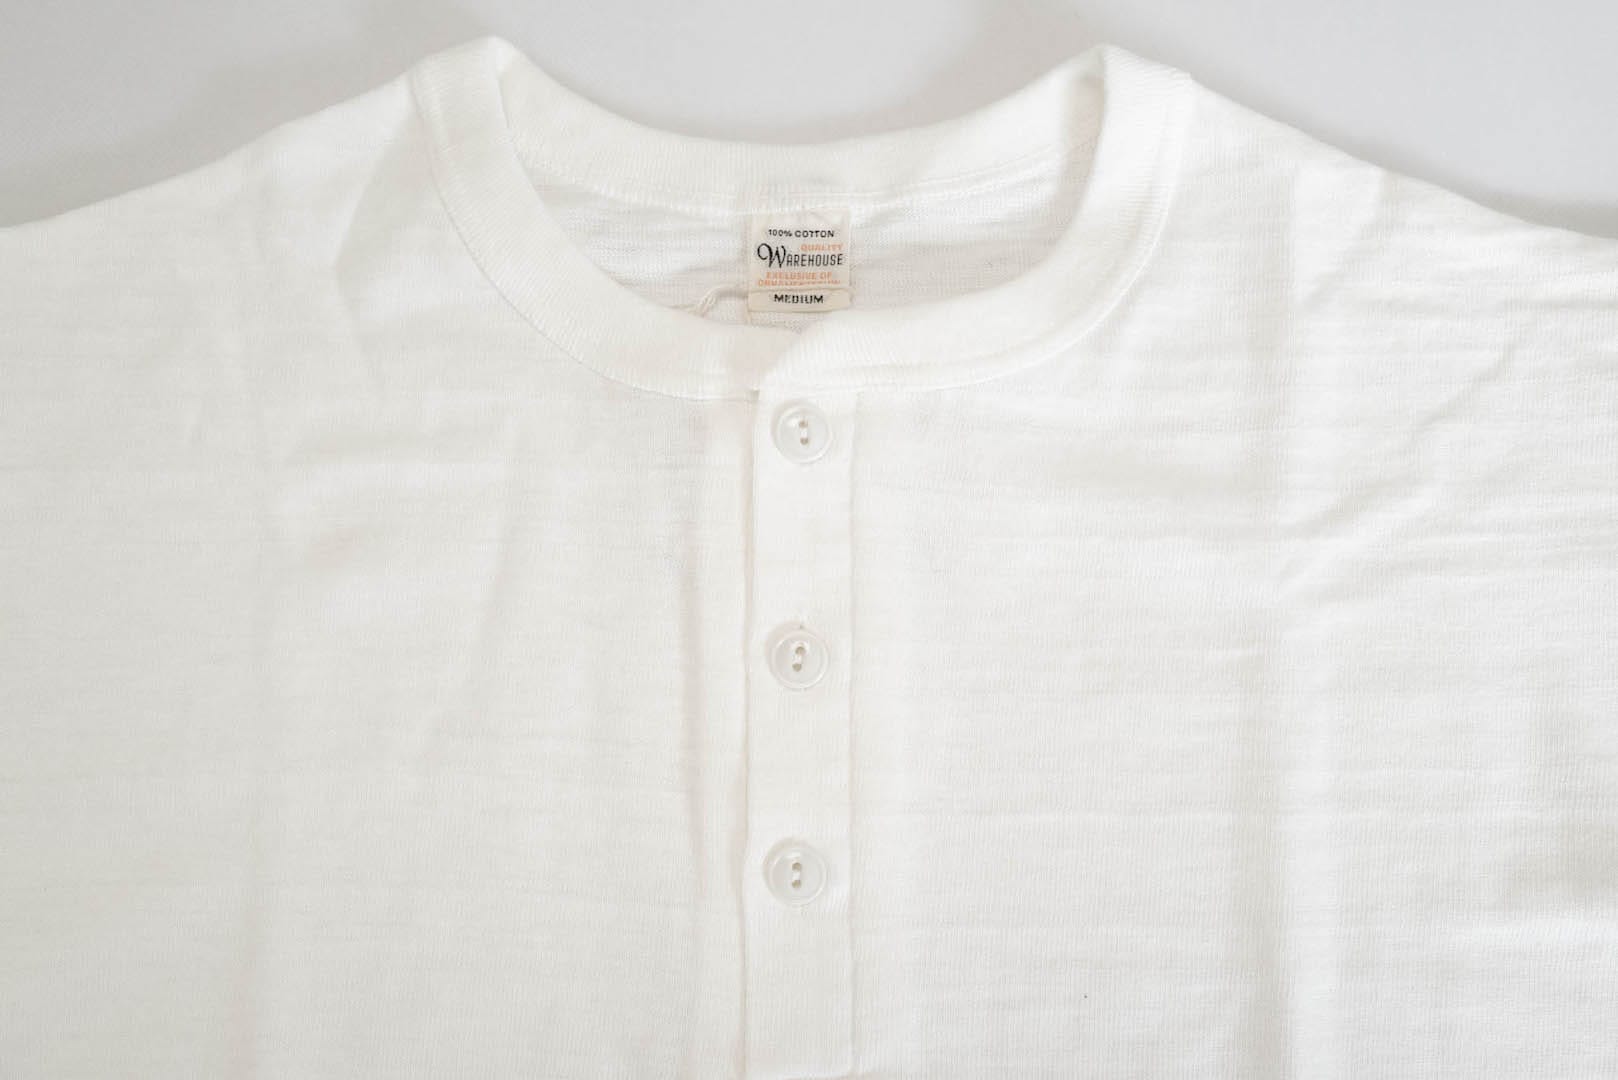 Warehouse 5.5oz "Bamboo Textured" L/S Henley Tee (White)